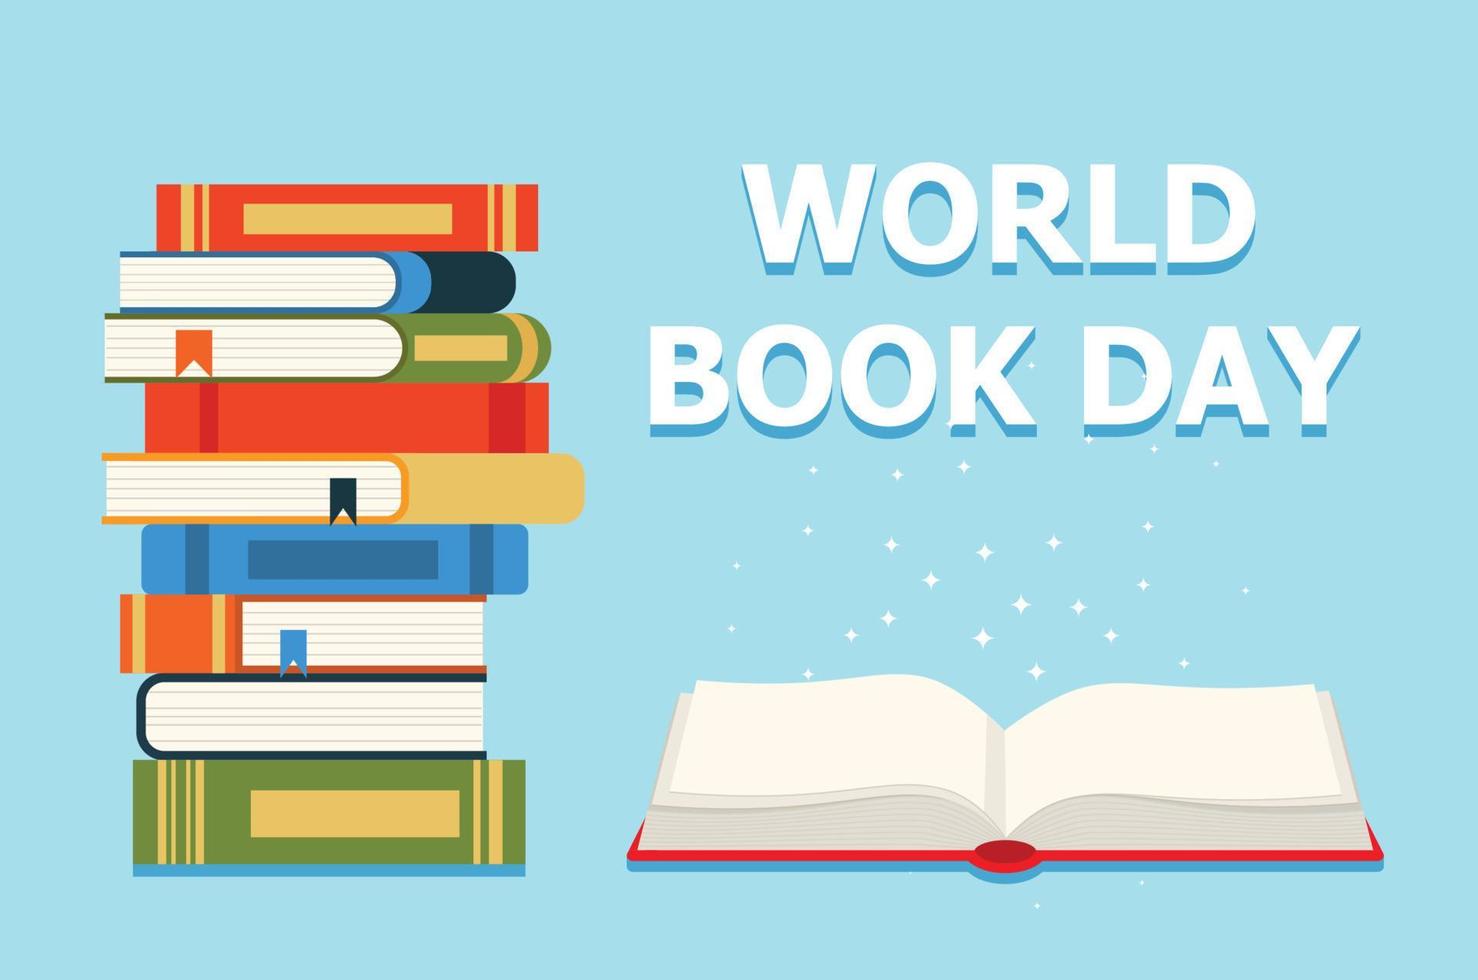 World book day 23 april. Stack of colorful books with open book on teal background. Education vector illustration.